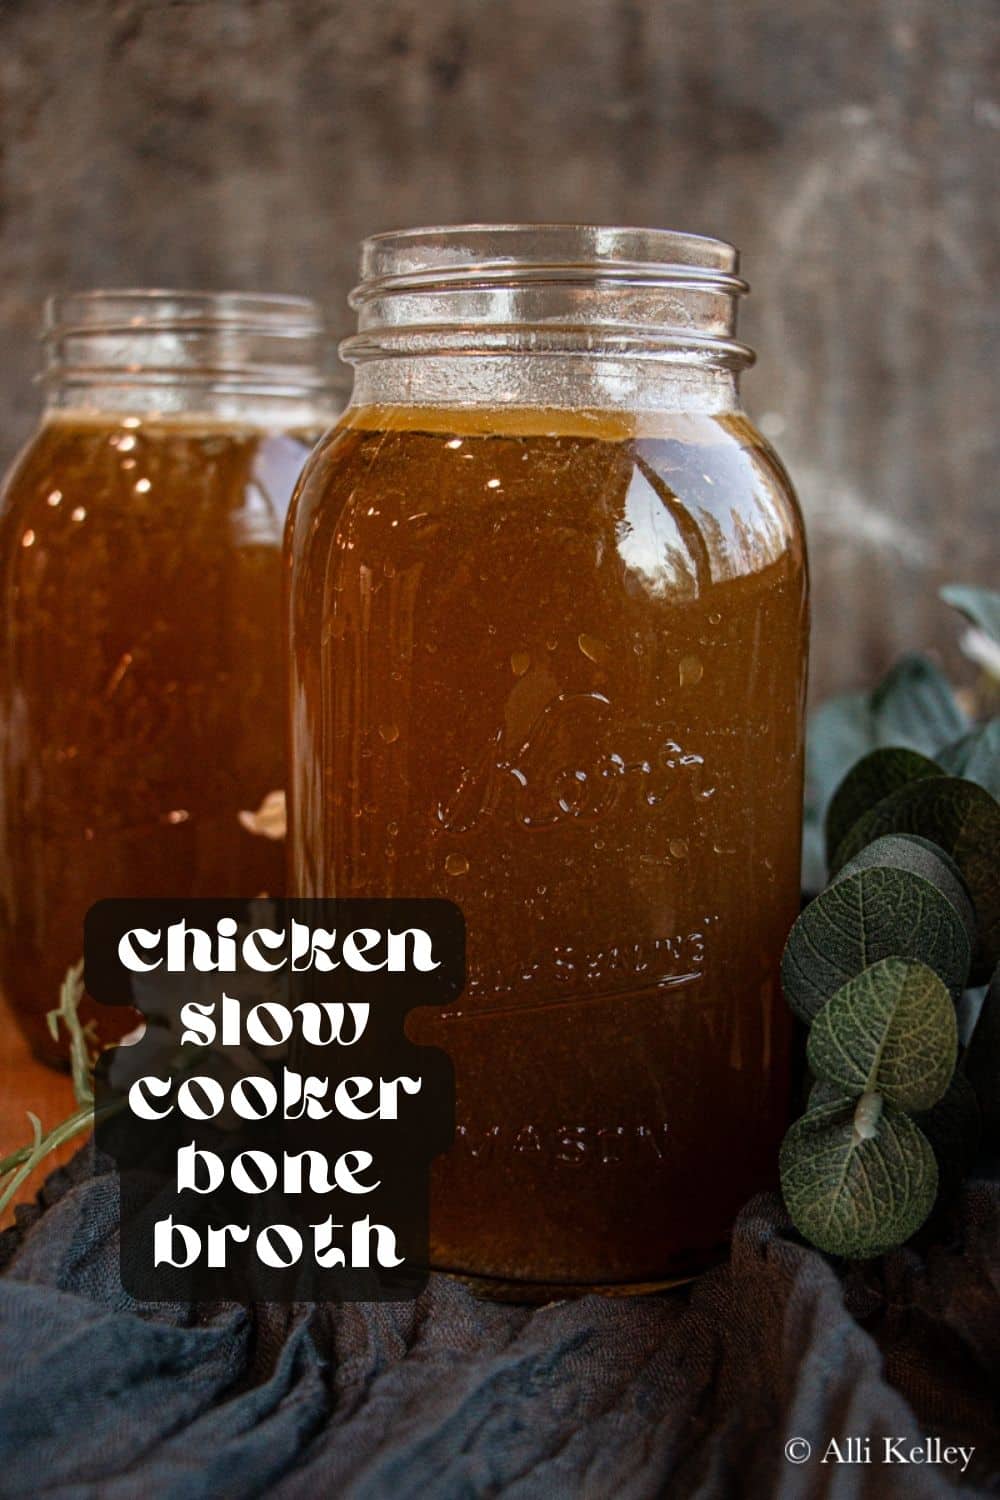 Chicken bone broth is so easy to make in a slow cooker and tastes much better than store-bought! You can use this chicken bone broth recipe as the base for many dishes, such as soups, stews, casseroles, and sauces. Not only that – chicken bone broth is rich in vitamins and minerals, making it incredibly nutritious and beneficial for your health!